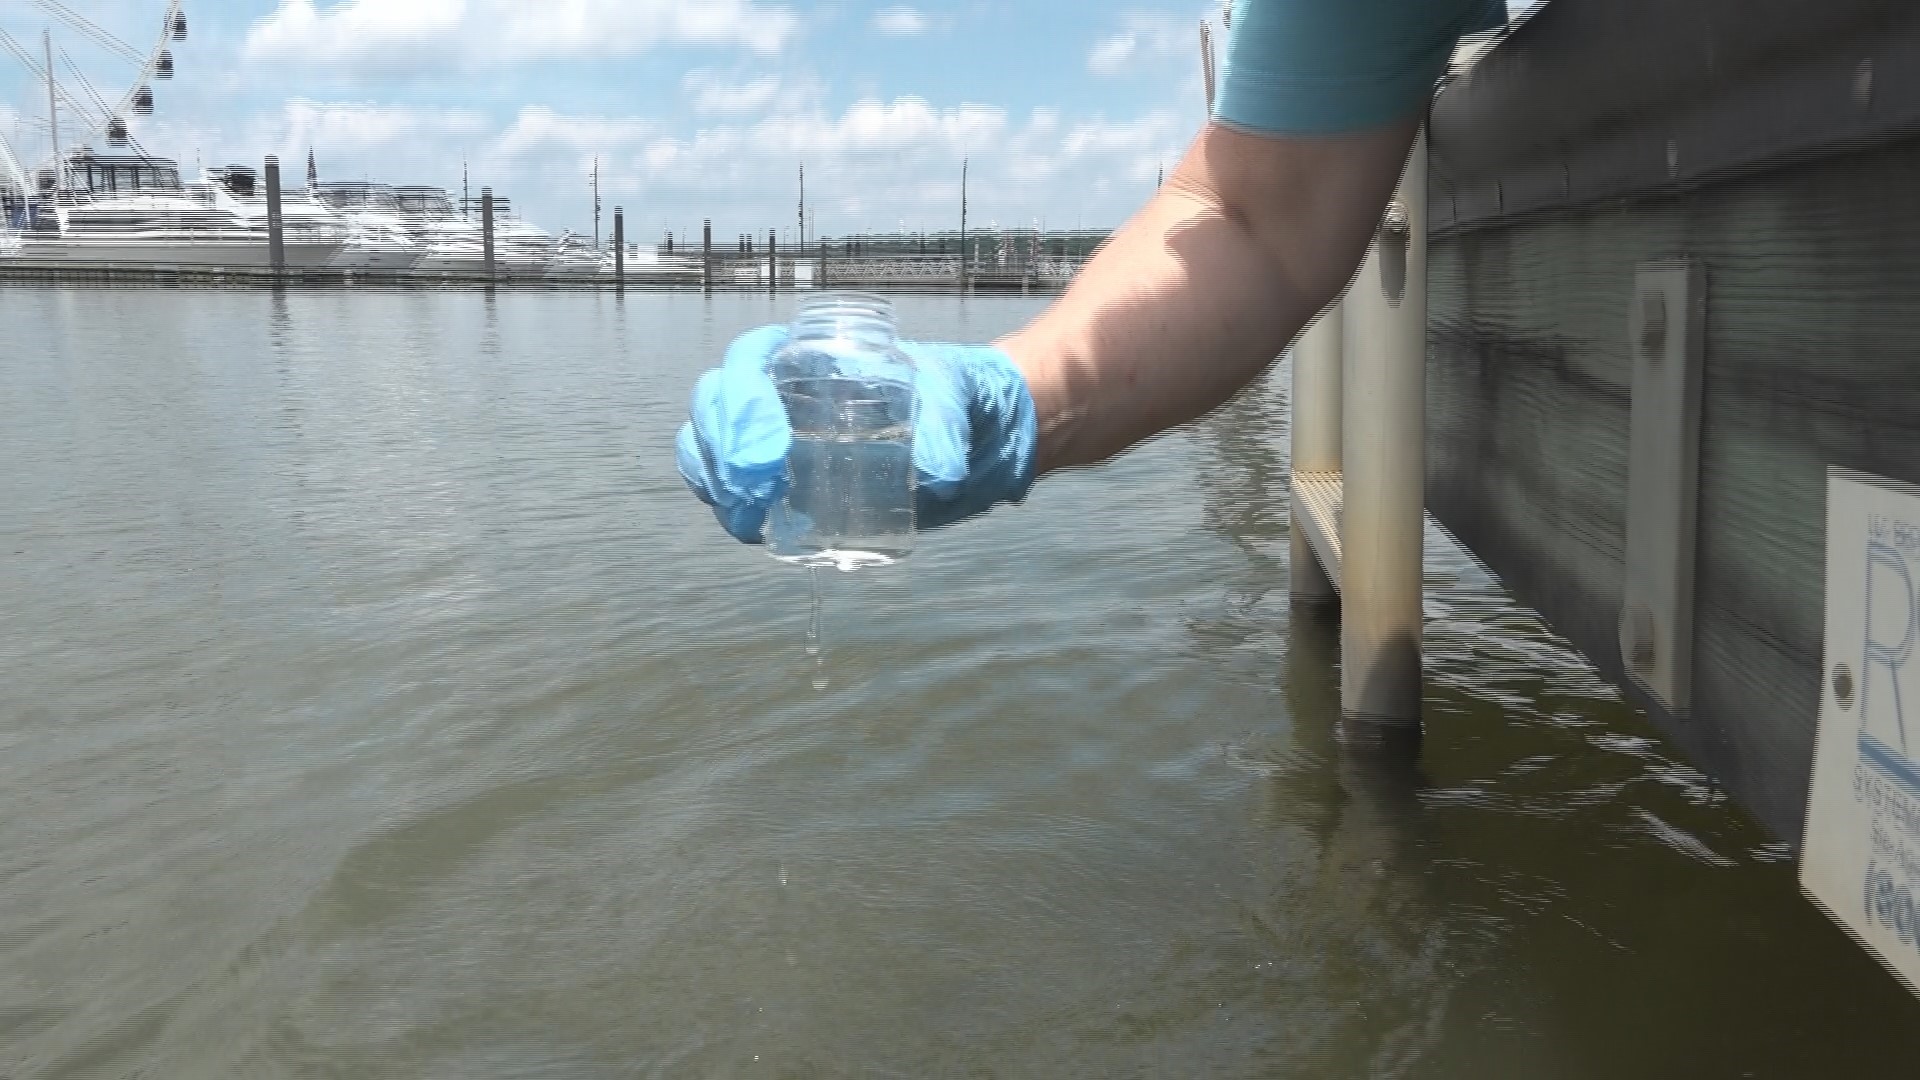 With summer now in full swing, We set out on a mission today to find out if its safe to go in the water at any of the hundreds of community beaches and waterways in our region threatened by pollution. What we learned may surprise you.